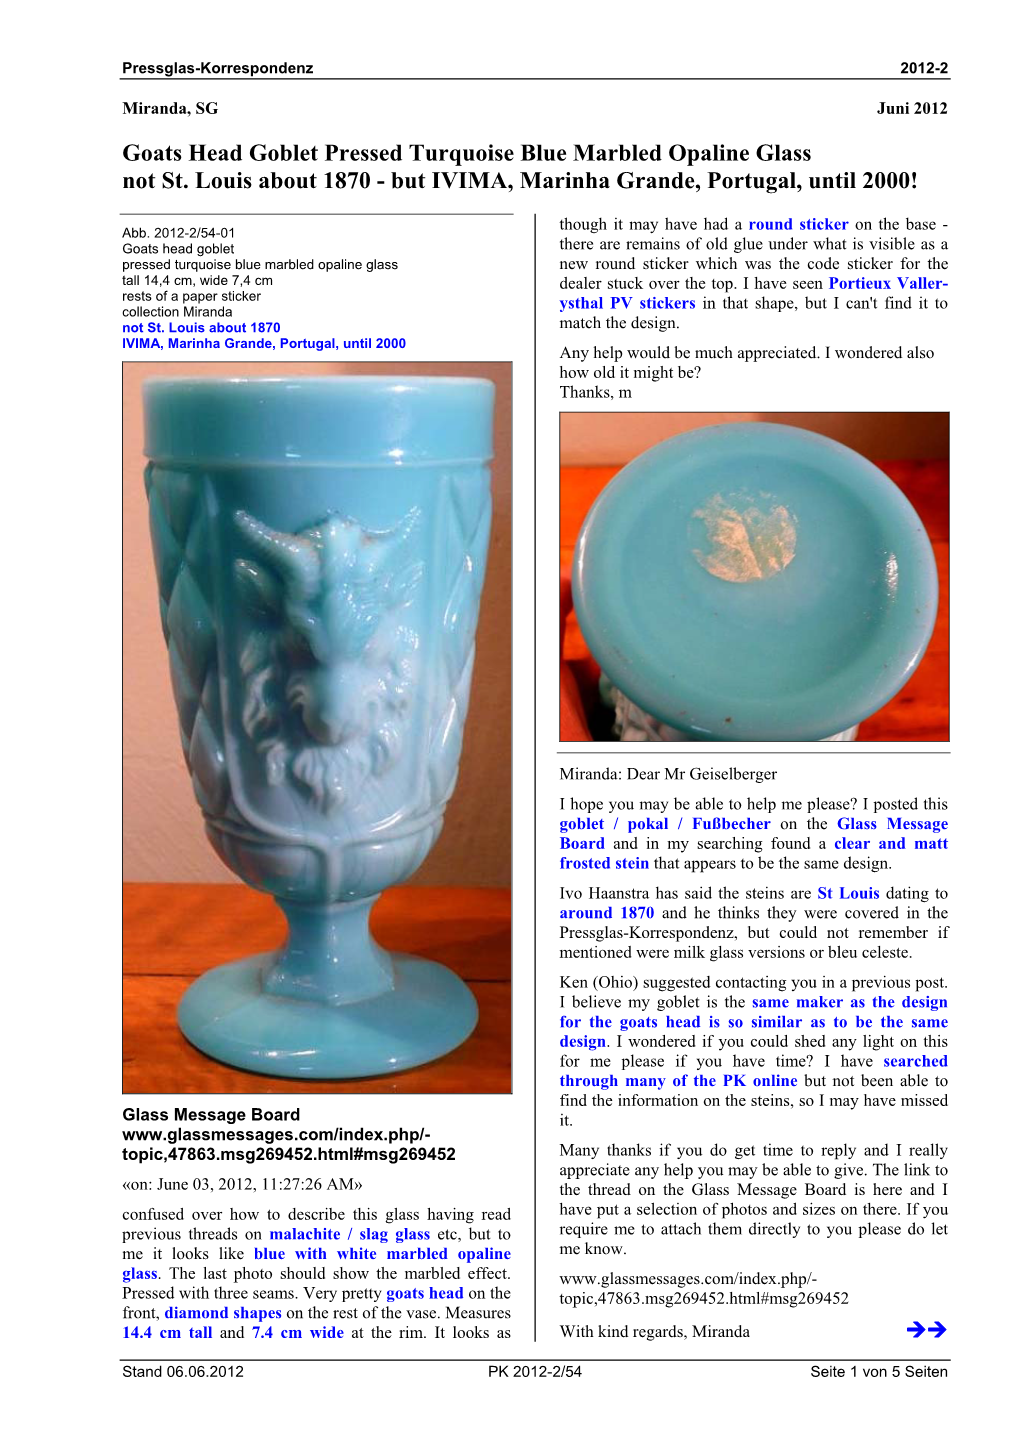 Goats Head Goblet Pressed Turquoise Blue Marbled Opaline Glass Not St. Louis About 1870 - but IVIMA, Marinha Grande, Portugal, Until 2000!